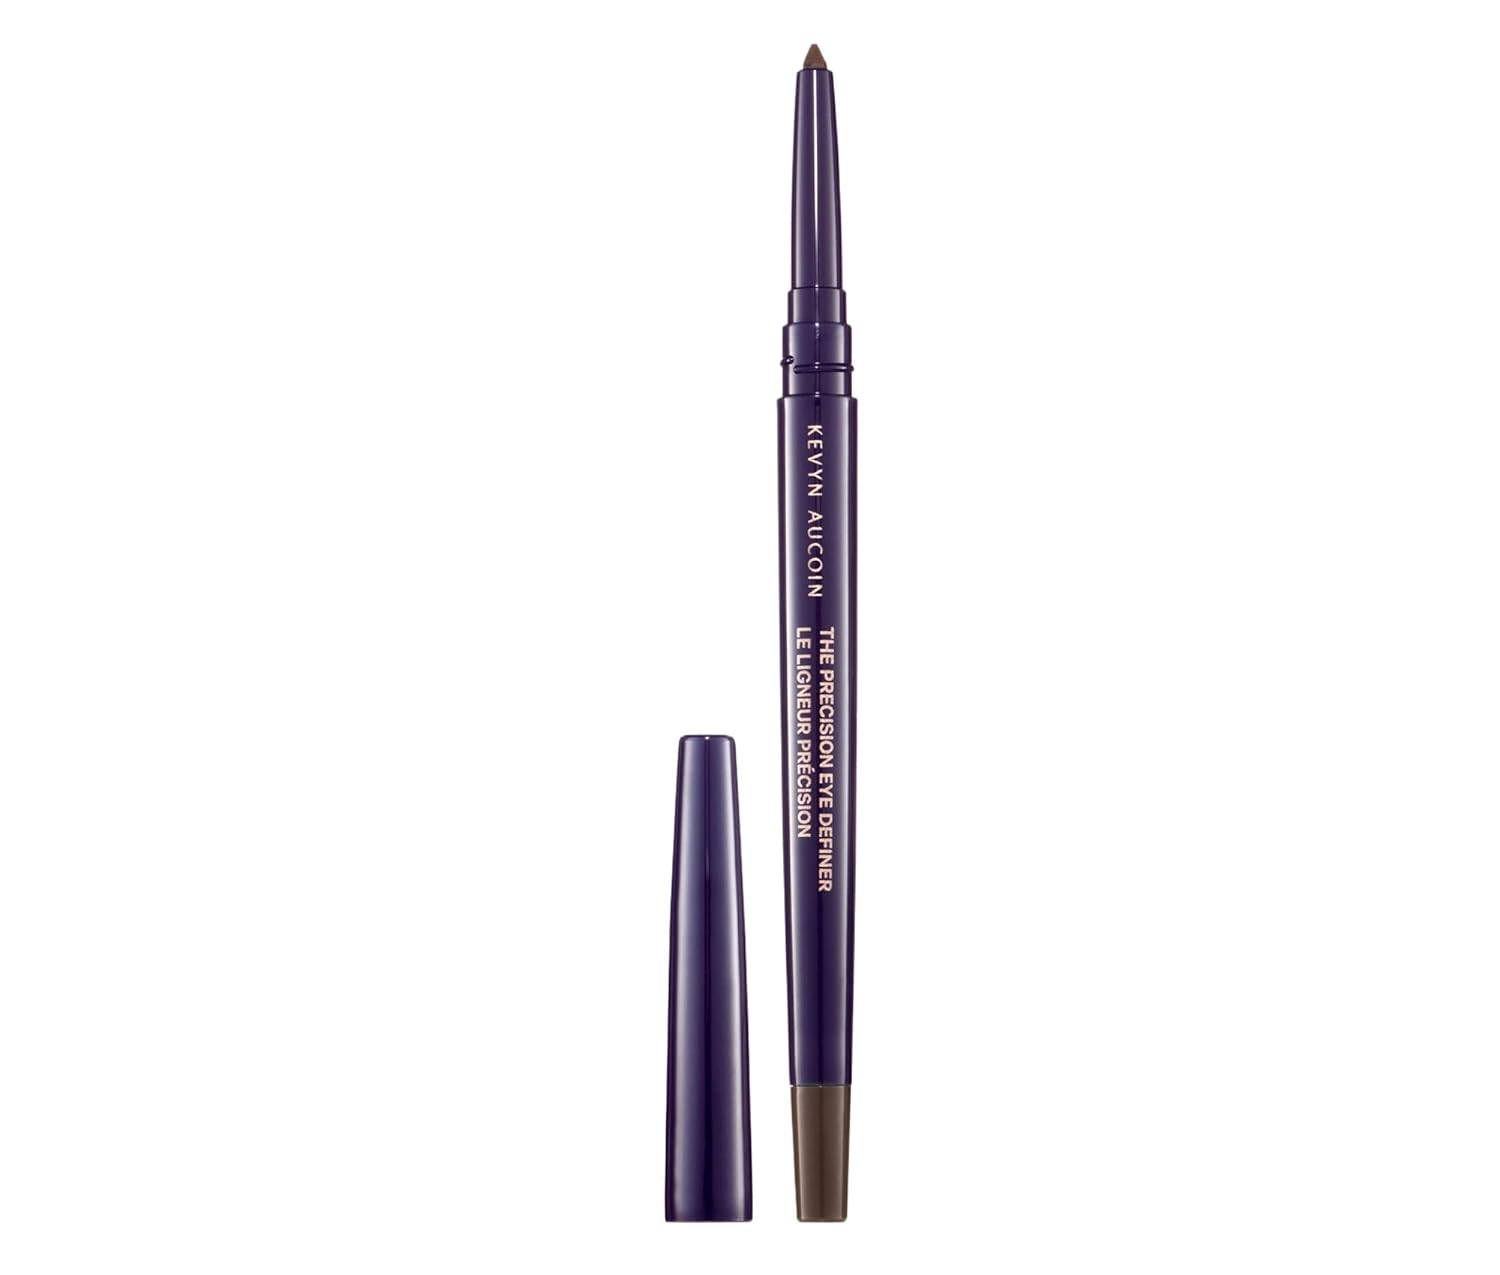 Kevyn Aucoin The Precision Eye Definer, Brown (Kobicha): Self sharpening eyeliner. Easy precise pencil application. Pro makeup artist go to. Define eyes for long wearing, sharp and smooth lines